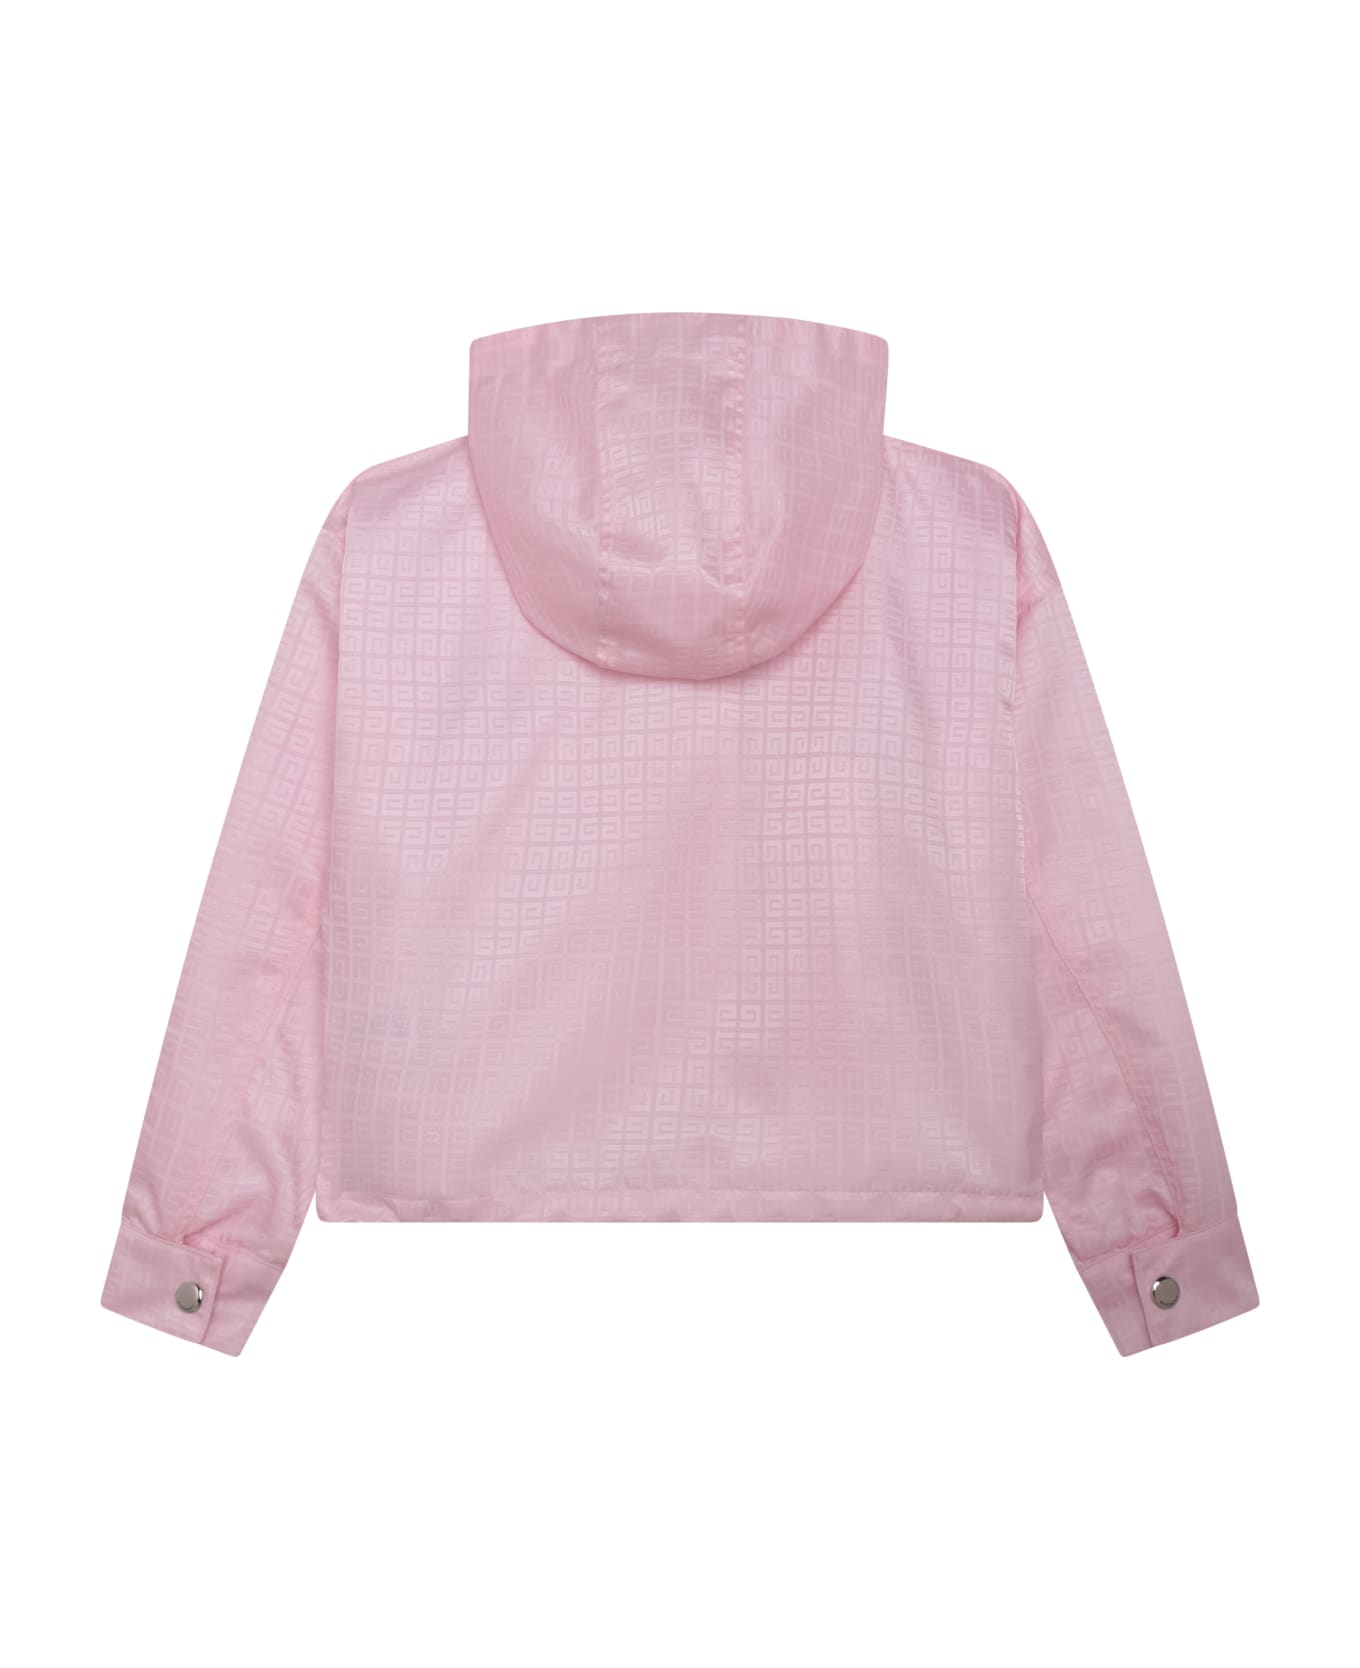 Givenchy Hooded Jacket - Pink